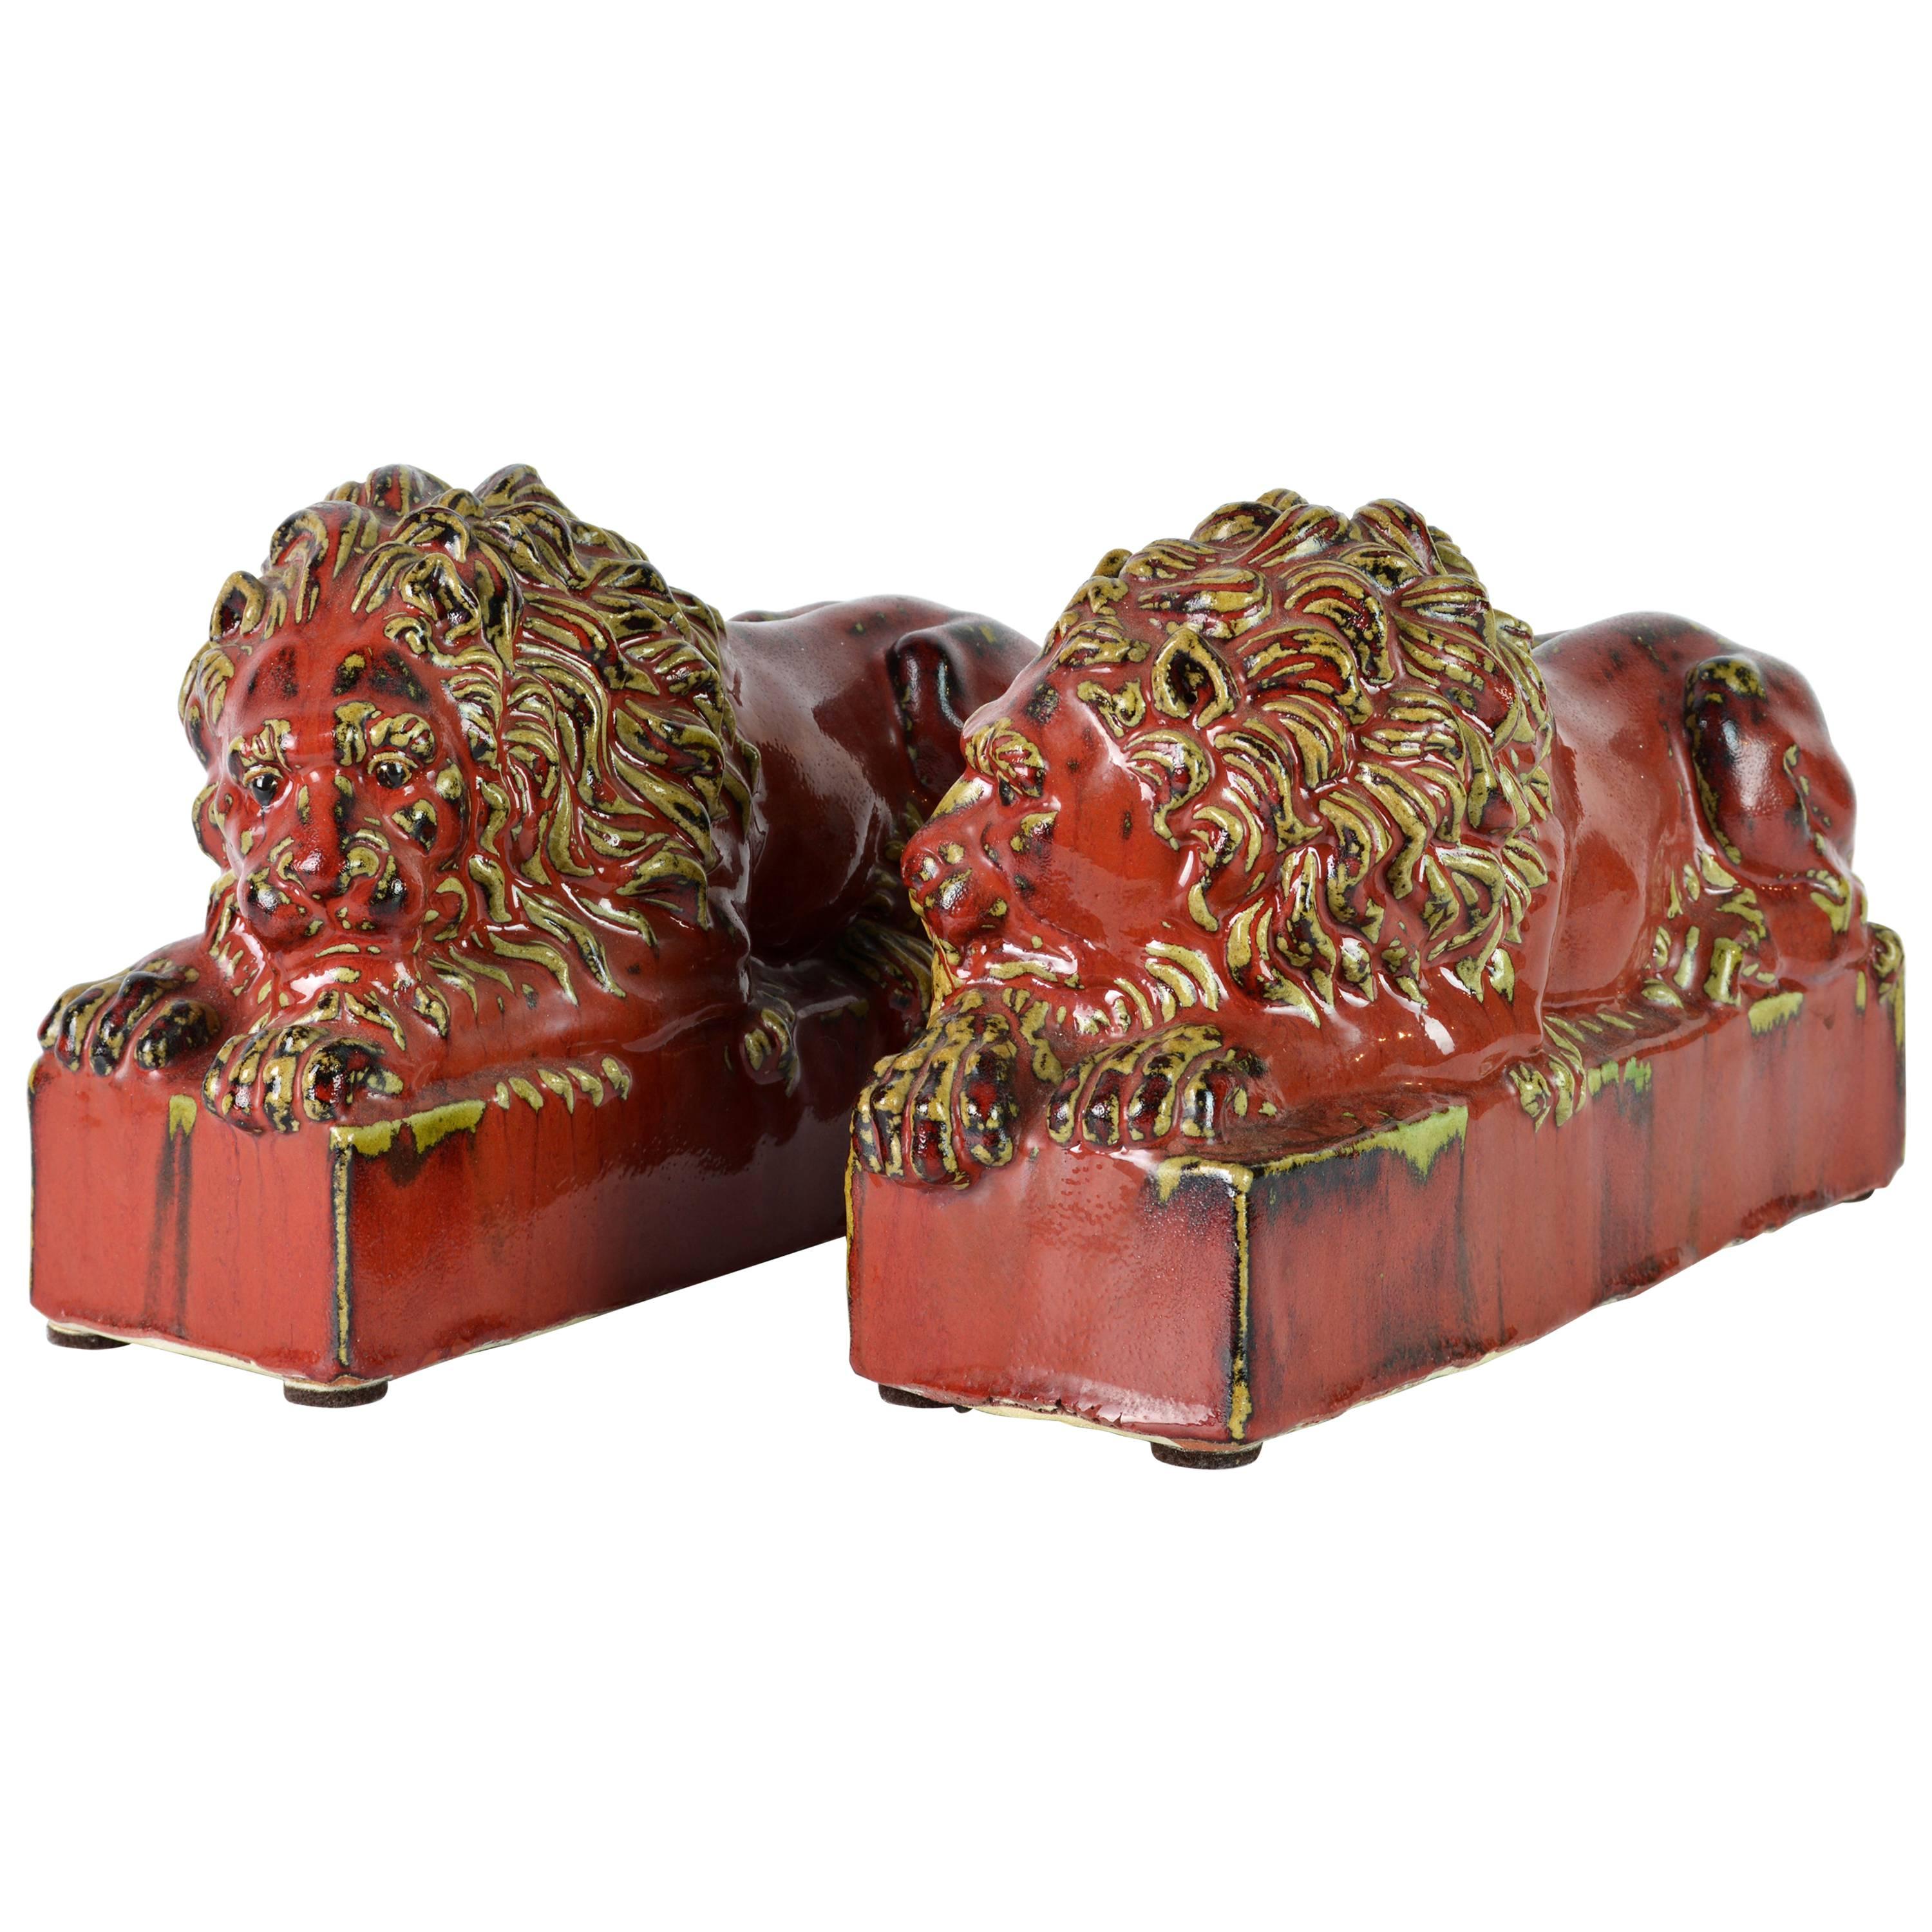 Opposing Pair of 20th Century Oxblood and Celadon Glazed Ceramic Resting Lions